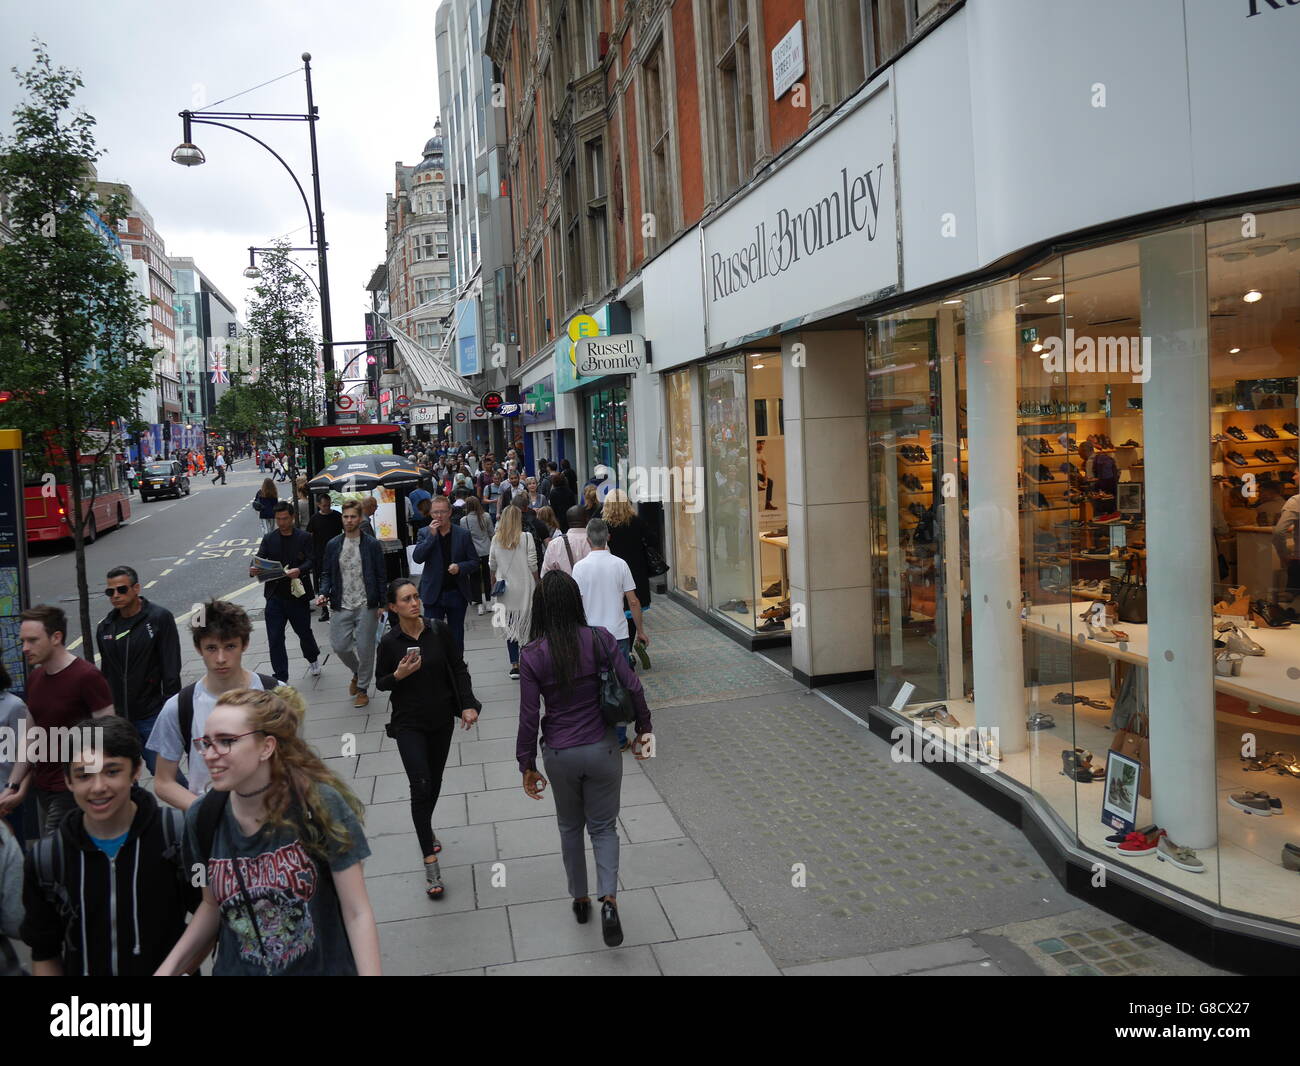 Russel Bromley Retail shop Oxford Street London Stock Photo